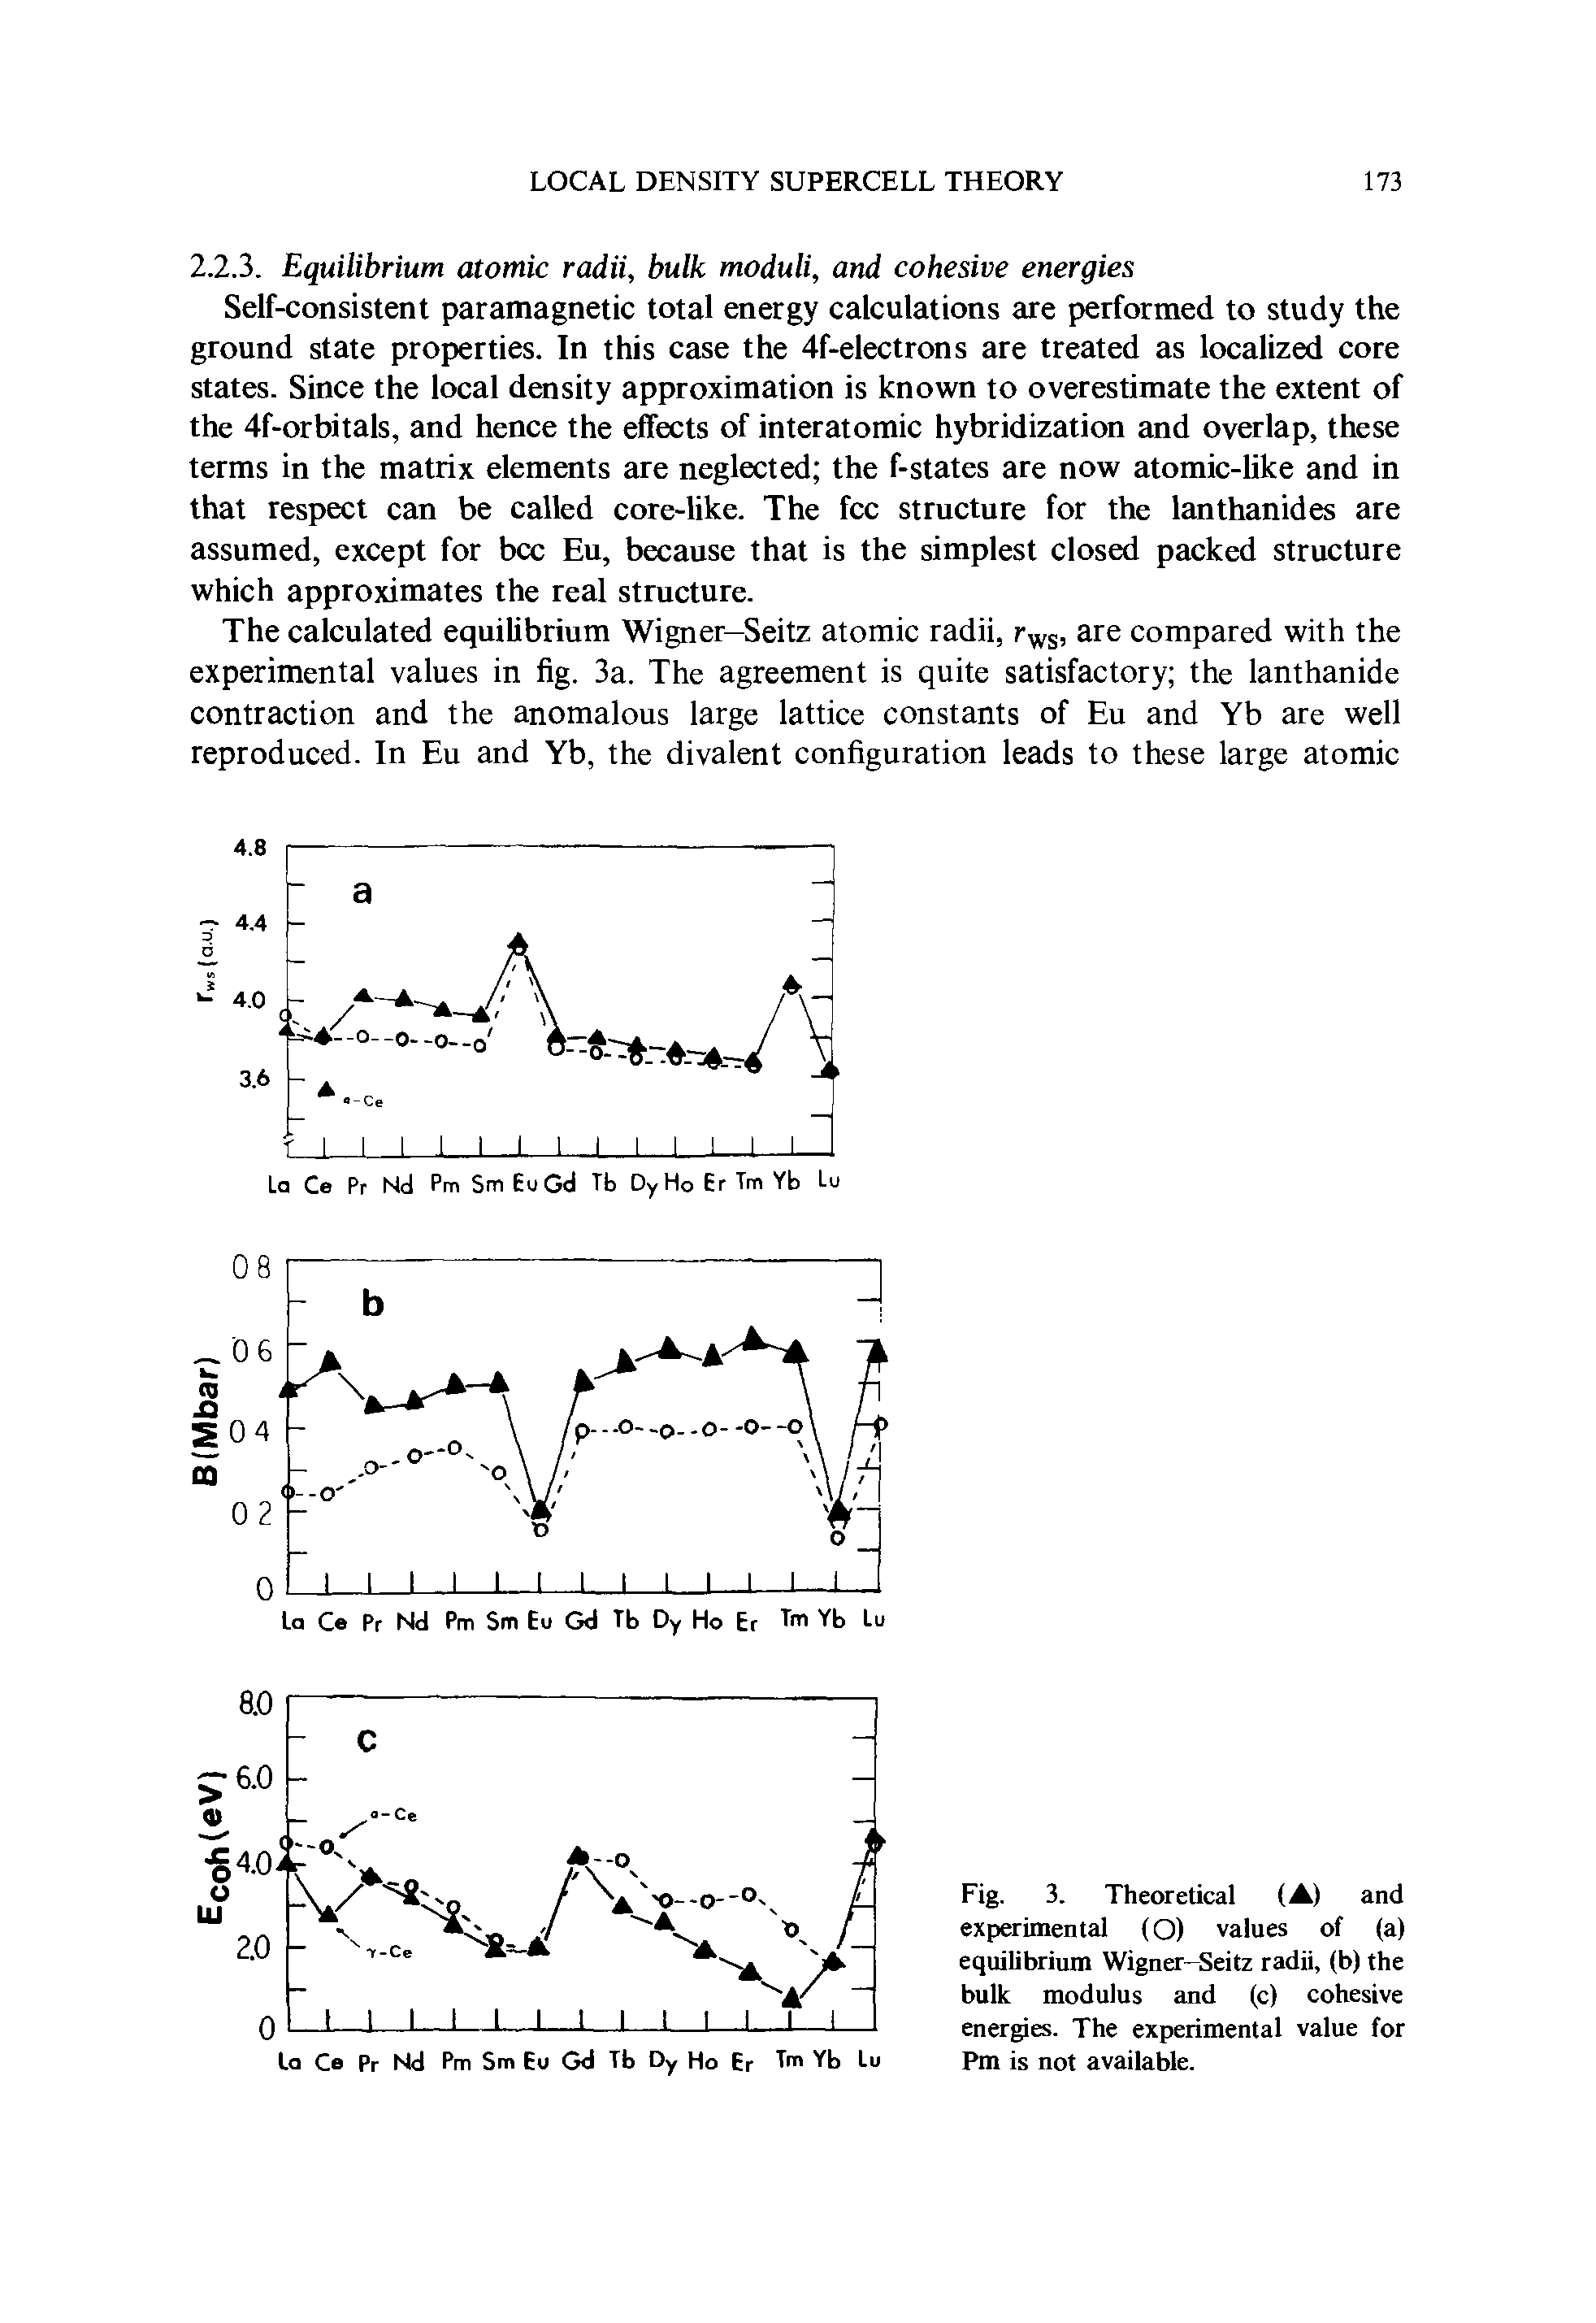 Fig. 3. Theoretical (A) and experimental (O) values of (a) equilibrium Wigner-Seitz radii, (b) the bulk modulus and (c) cohesive energies. The experimental value for Pm is not available.